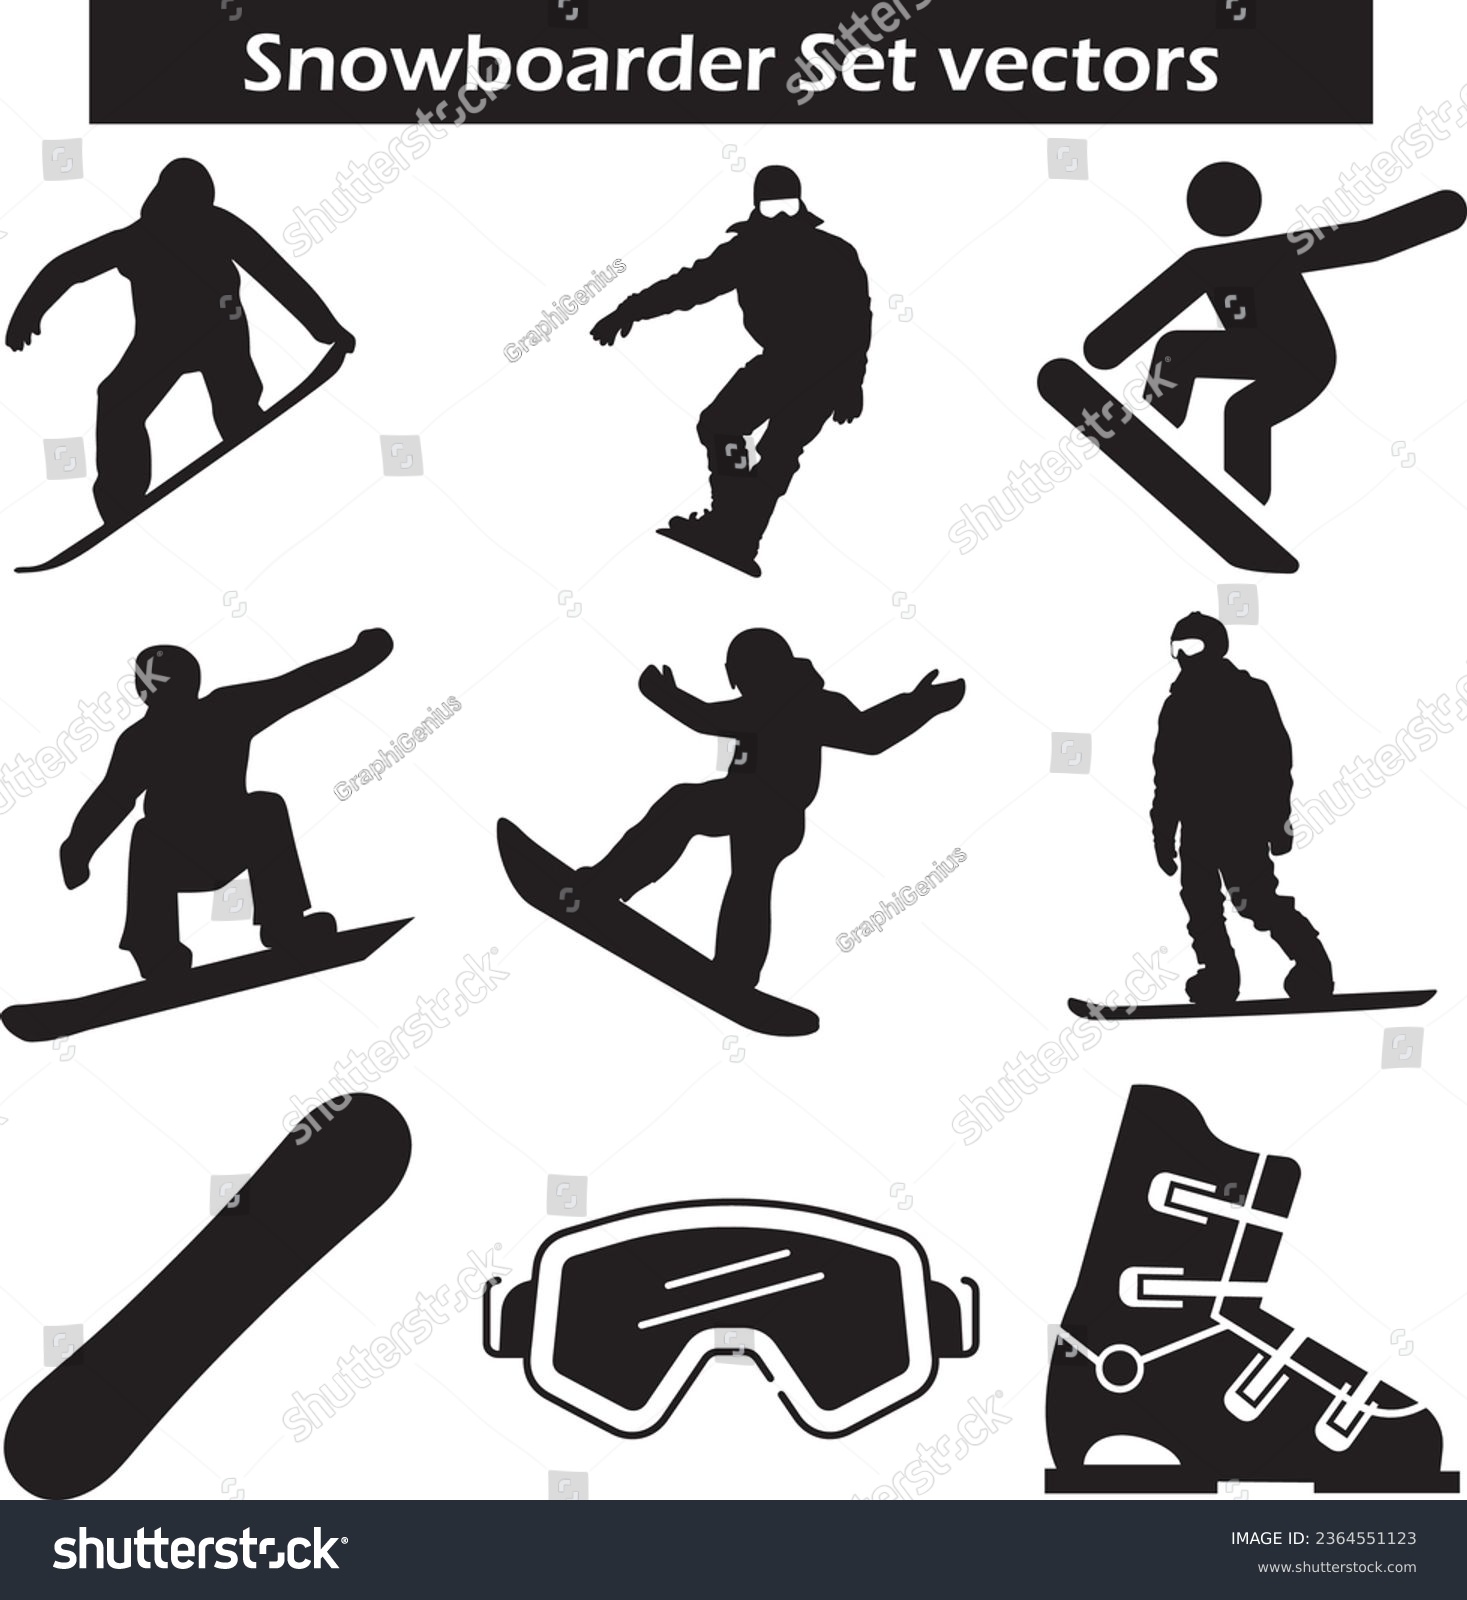 SVG of Snowboarder Set vectors, Snowboarder Silhouettes svg